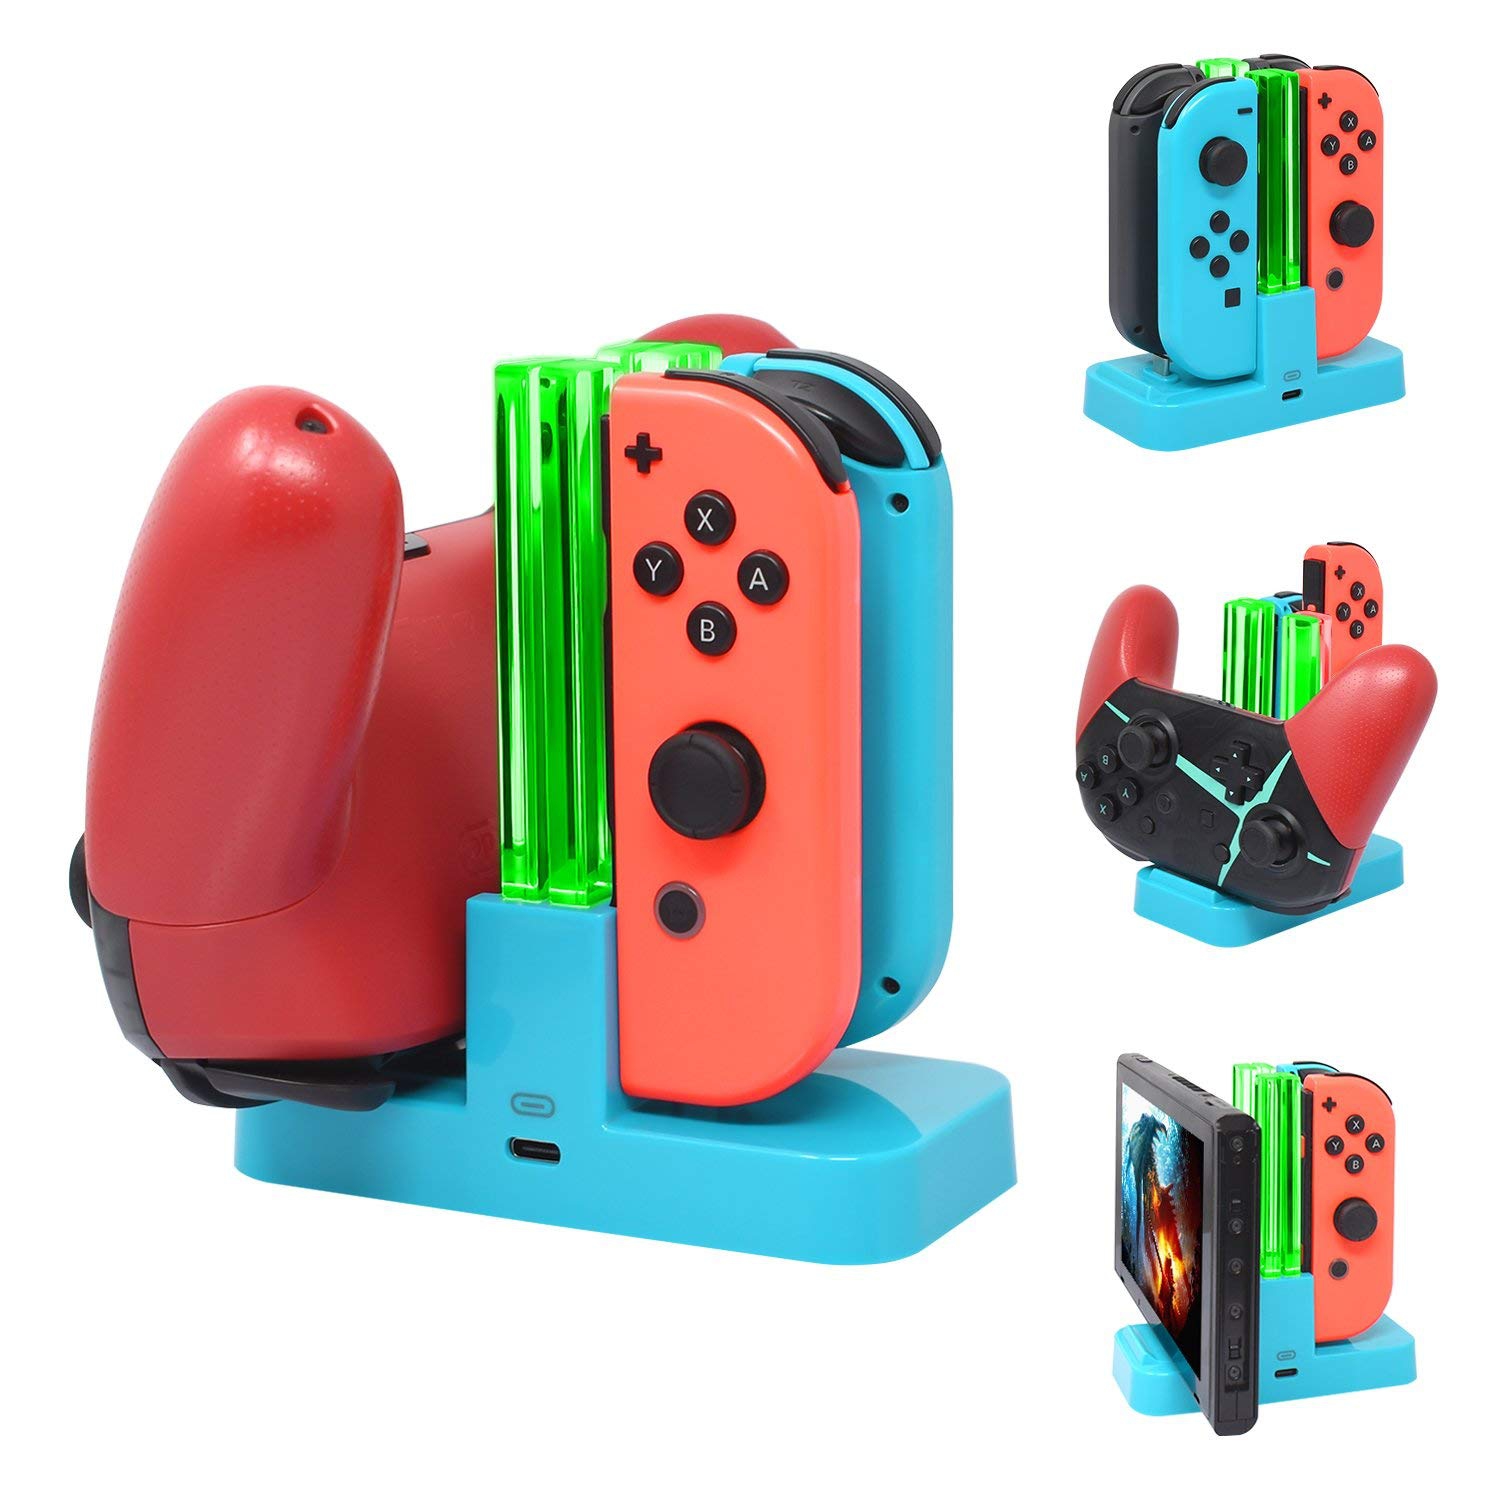 Pro Controller and Joy-Con Charging Dock for Nintendo Switch with Charging Indicator and Type C Charging Cable